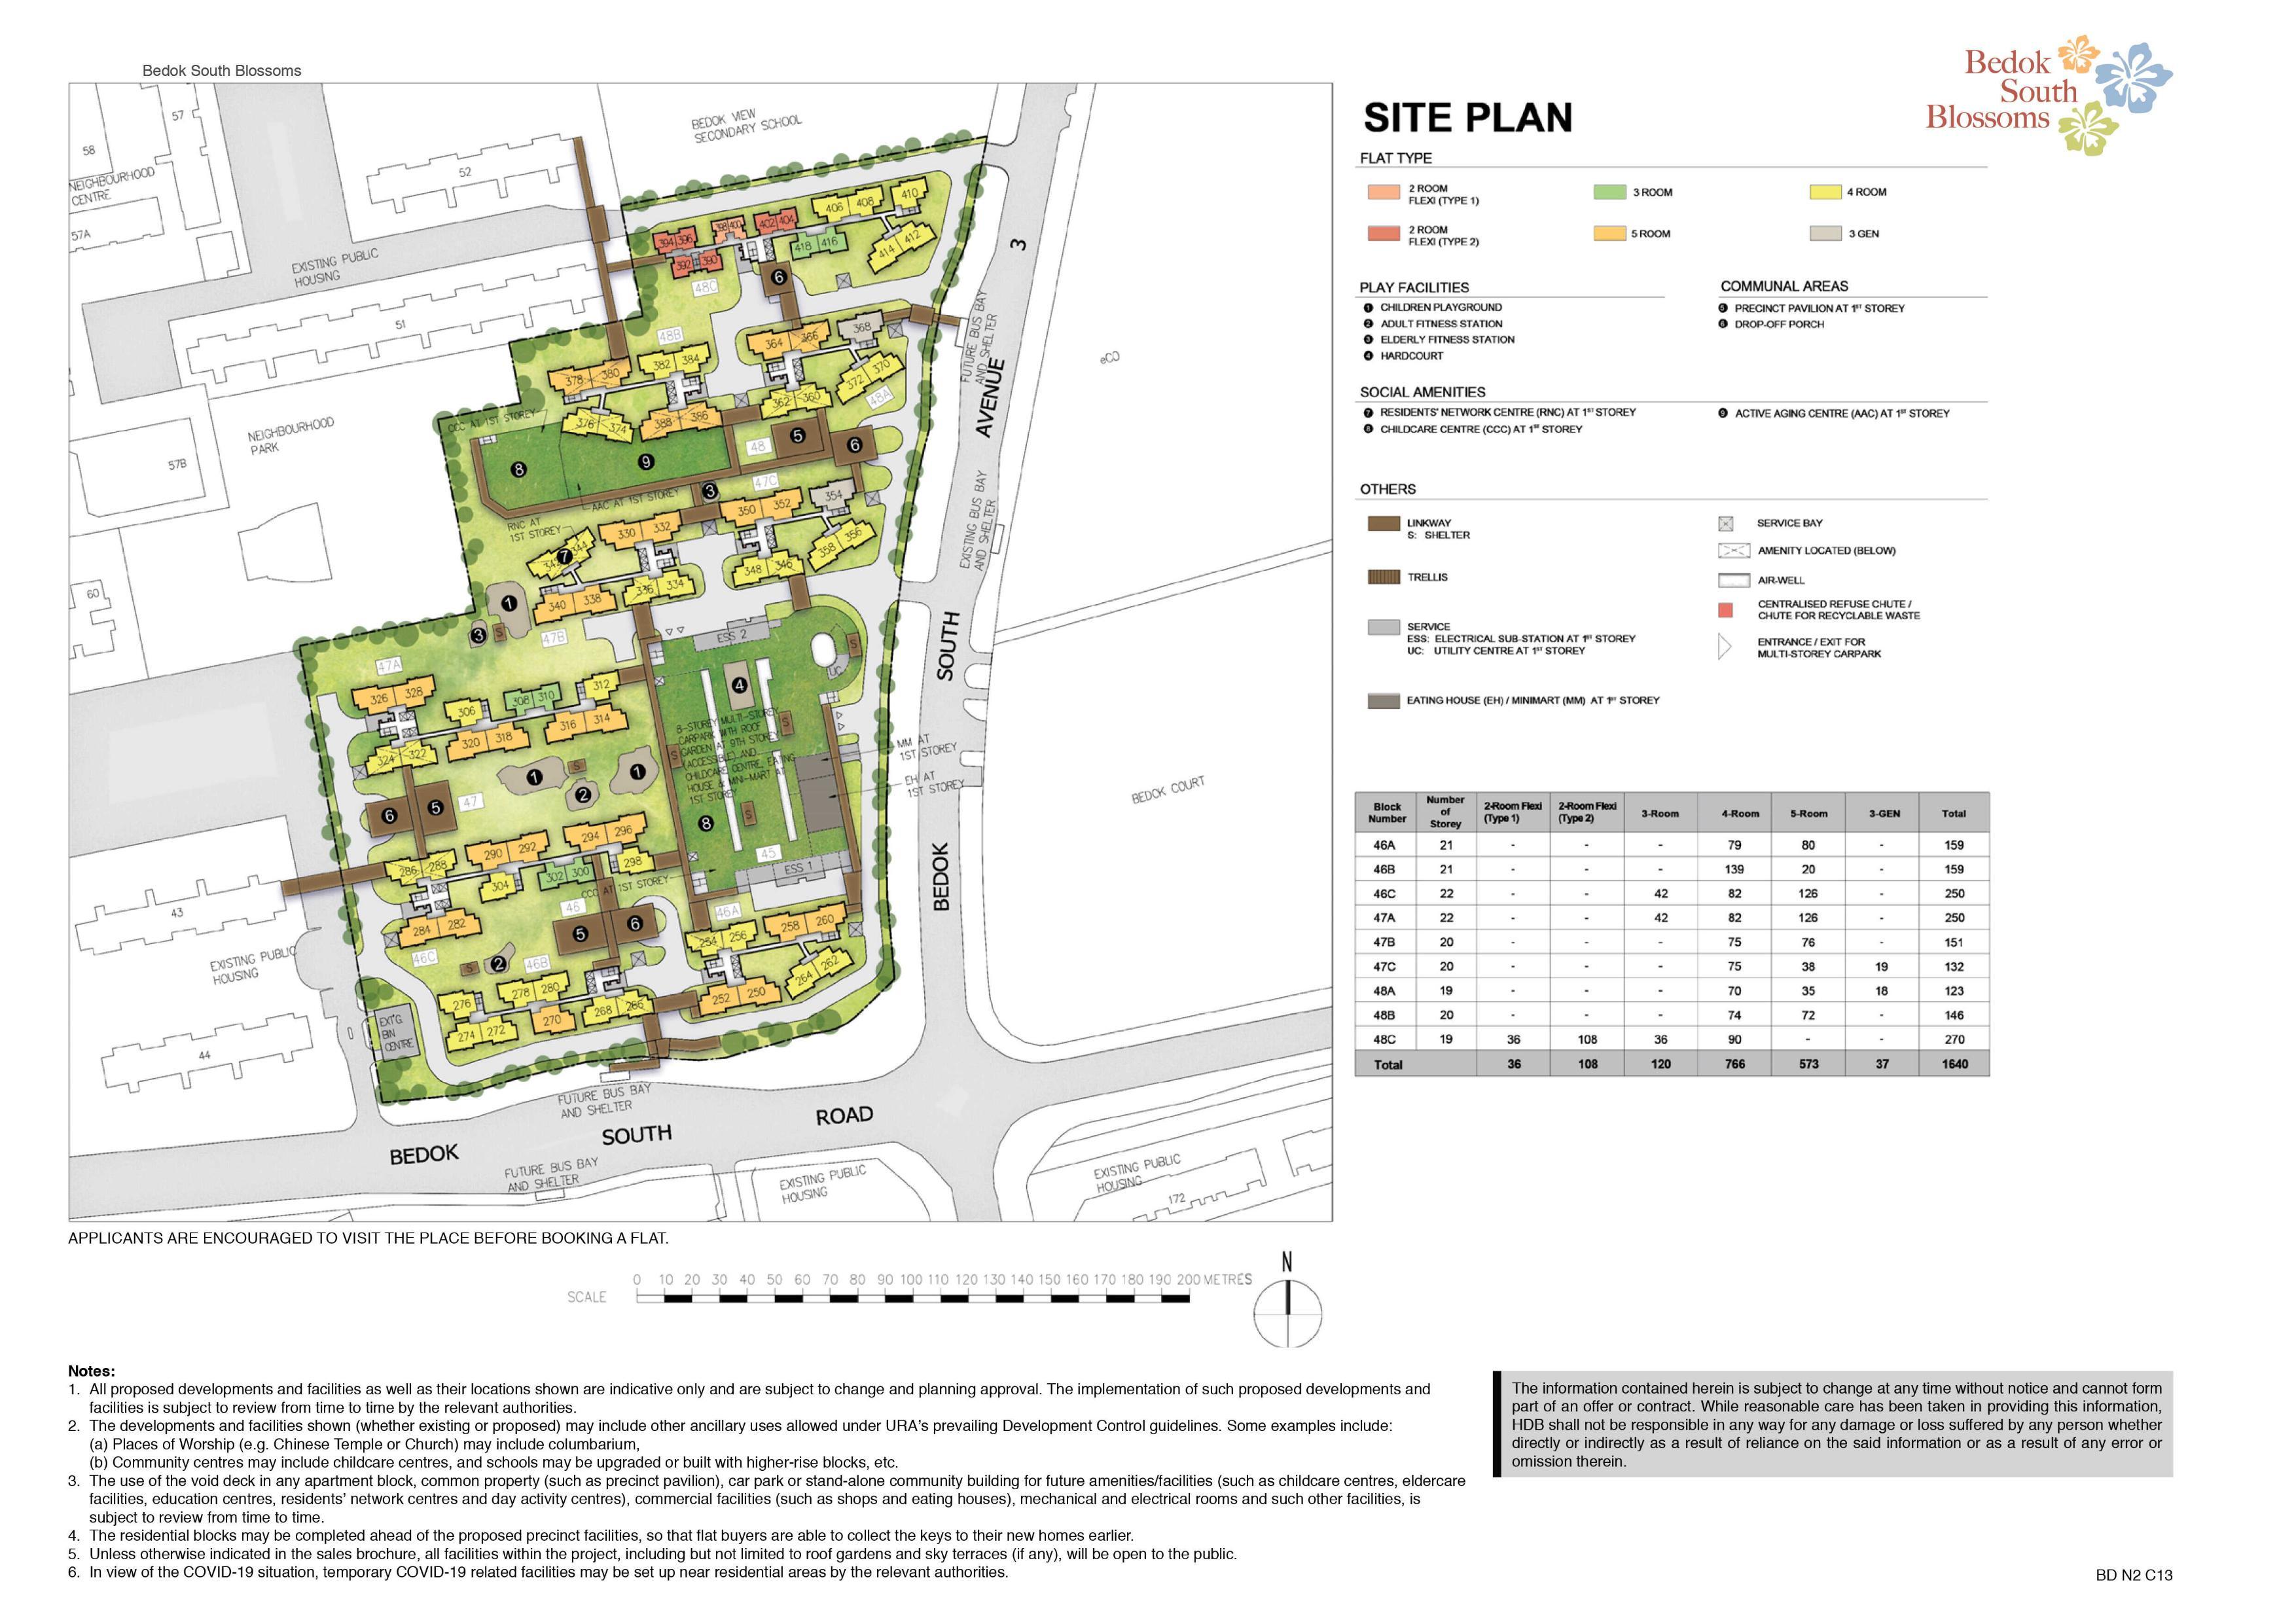 Bedok South Blossoms site-plan